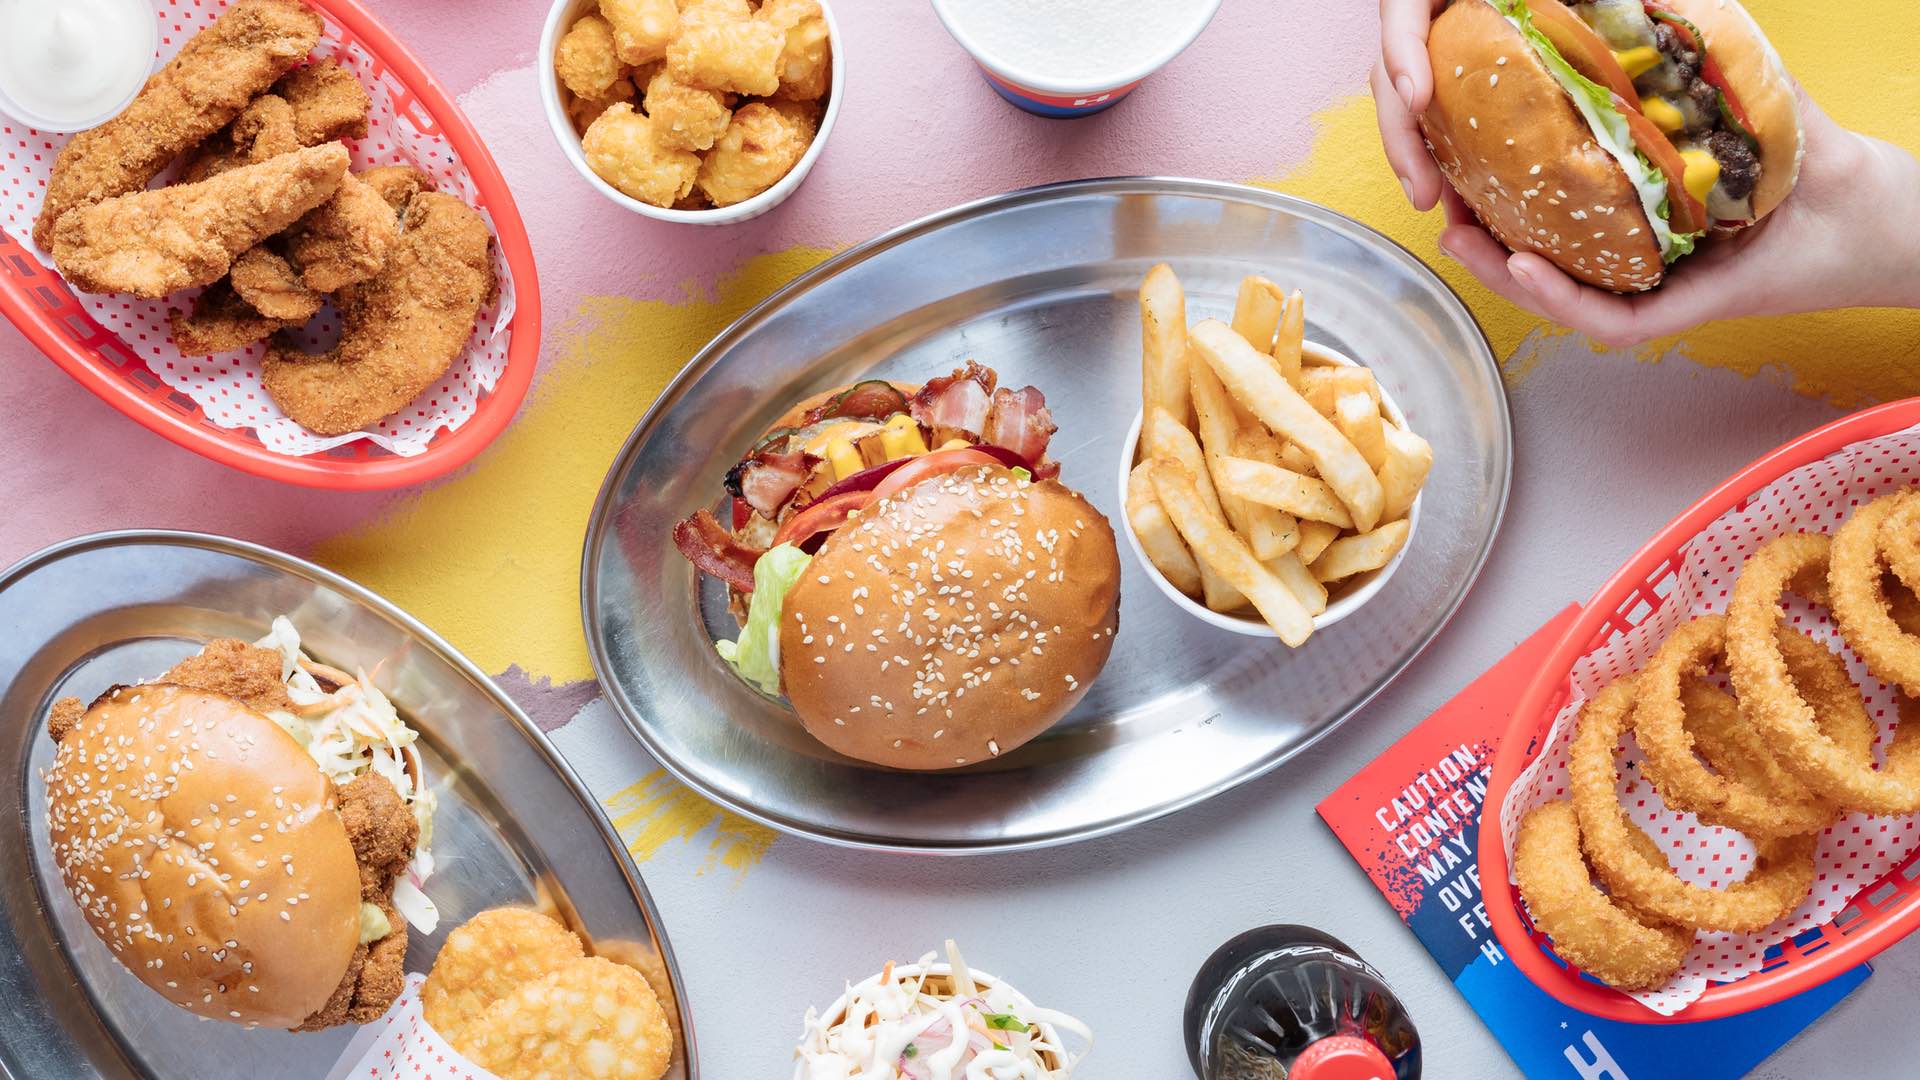 Melbourne Hamburger Haven Huxtaburger Is Opening in Sydney This Month